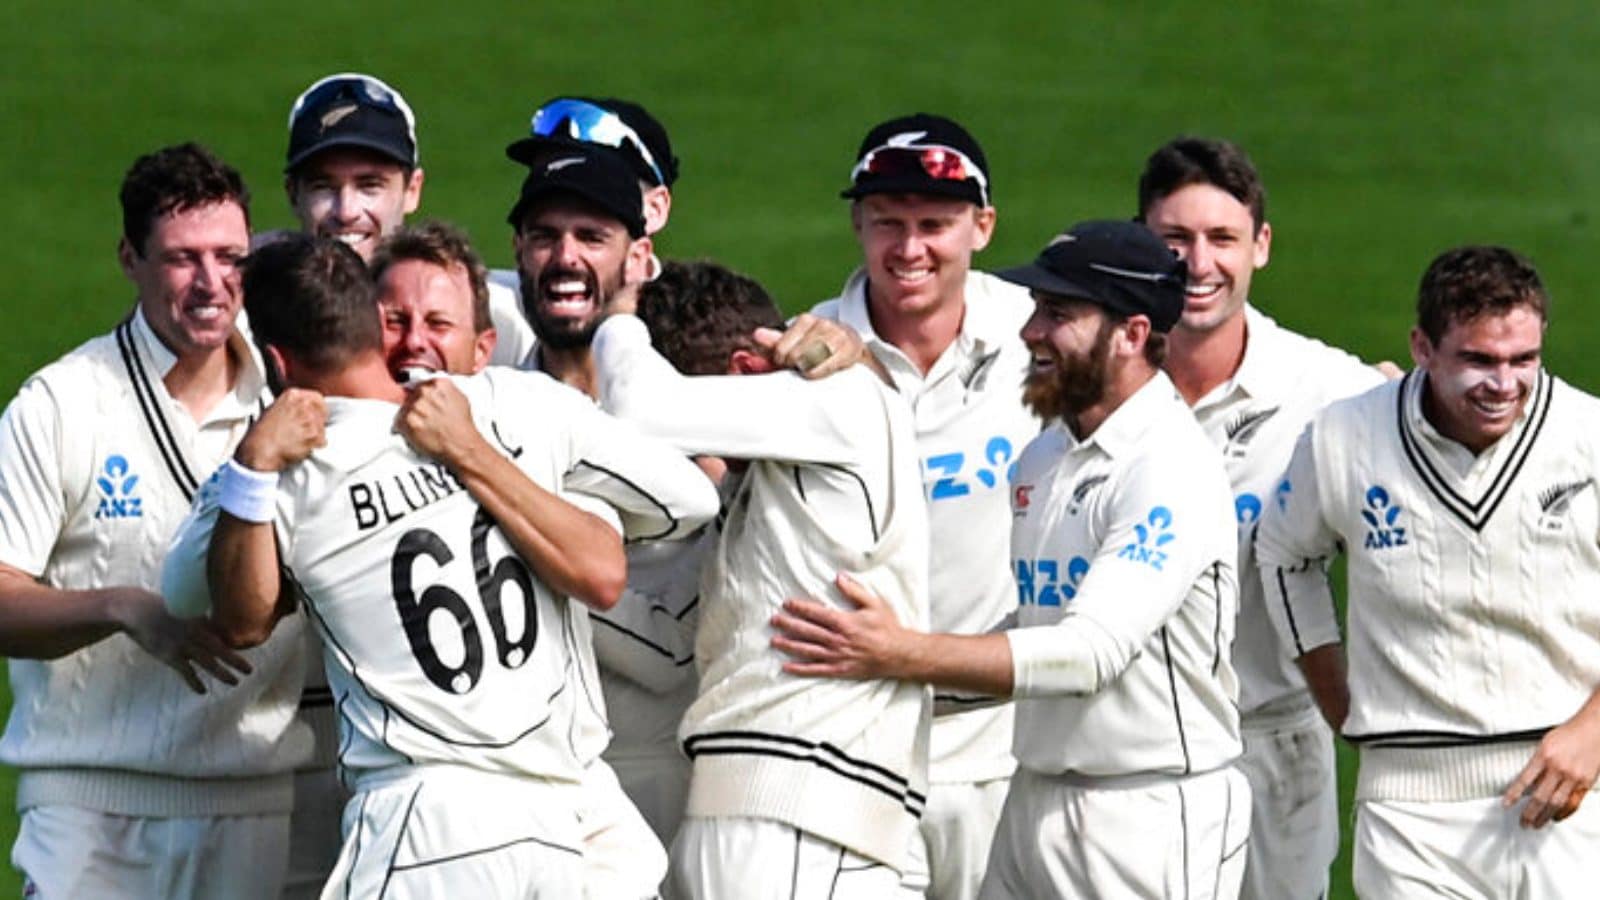 New Zealand’s Thrilling Win Over England Reminds R Ashwin of 2005 Edgbaston Ashes Test